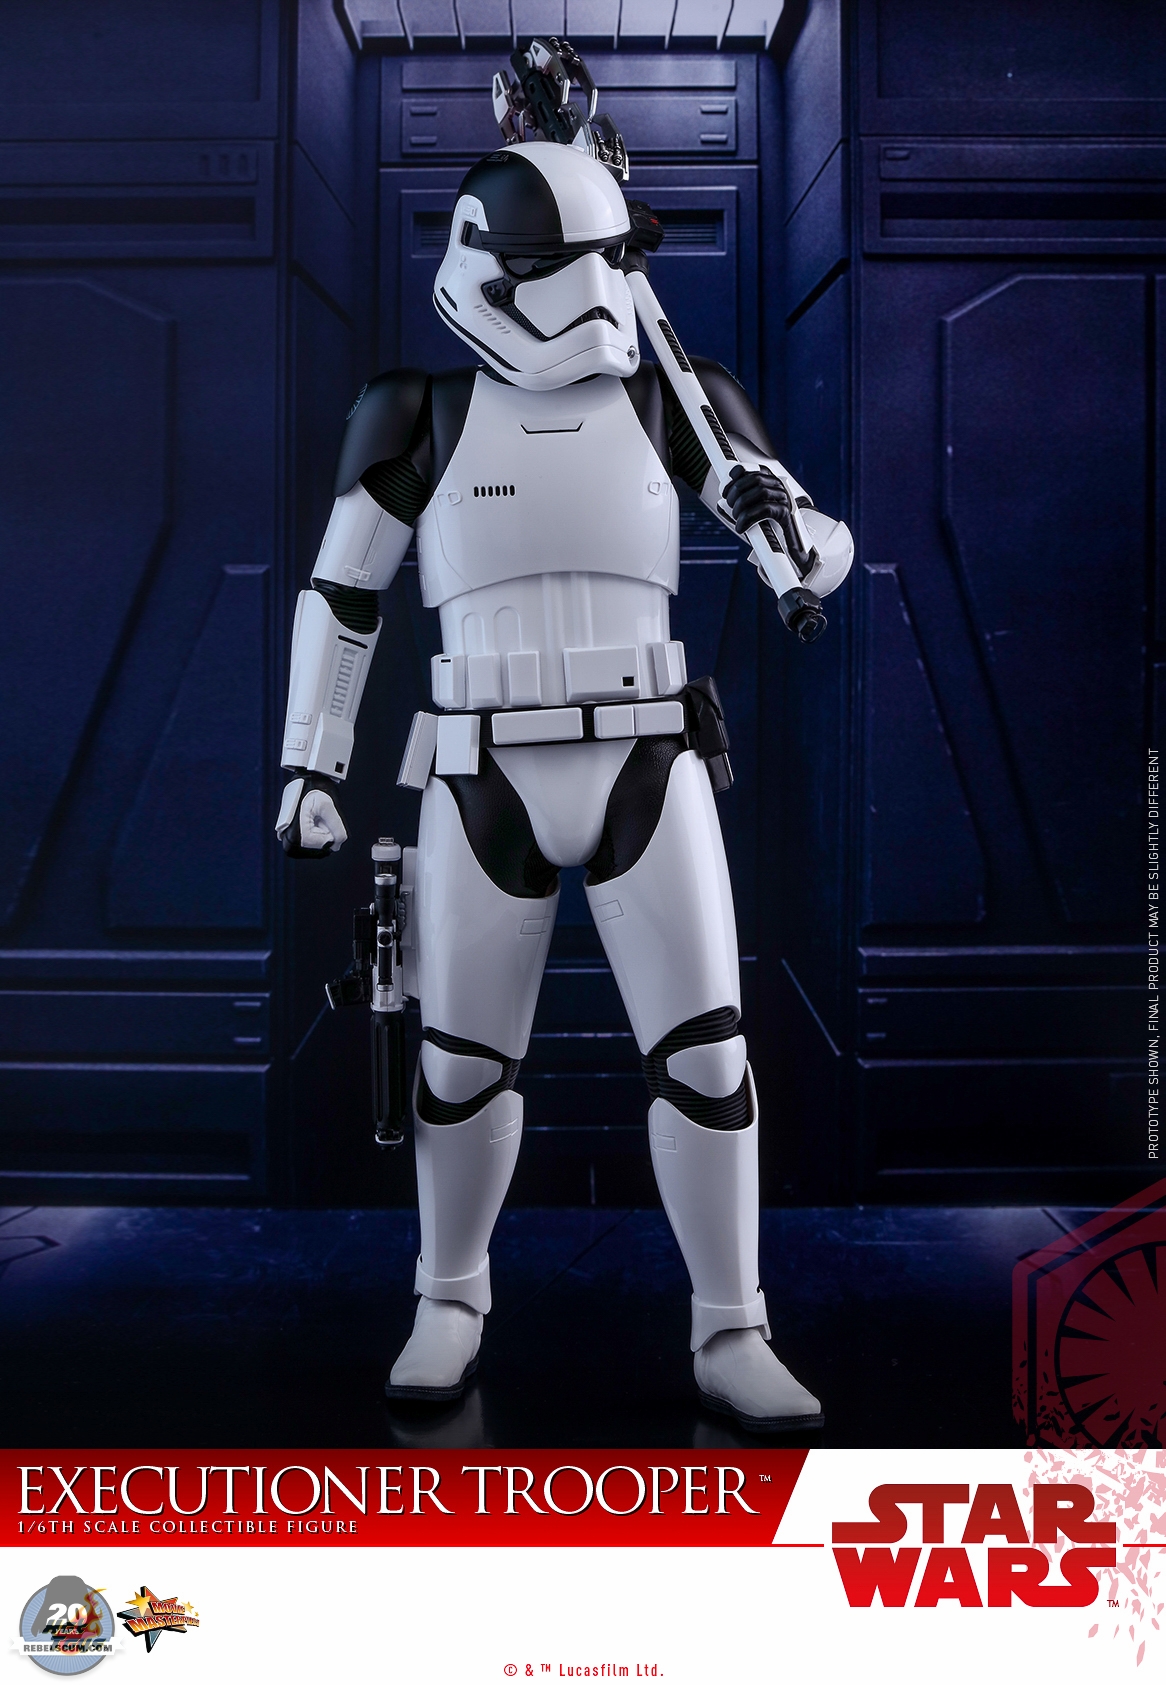 Hot-Toys-MMS248-The-Last-Jedi-Executioner-Trooper-006.jpg